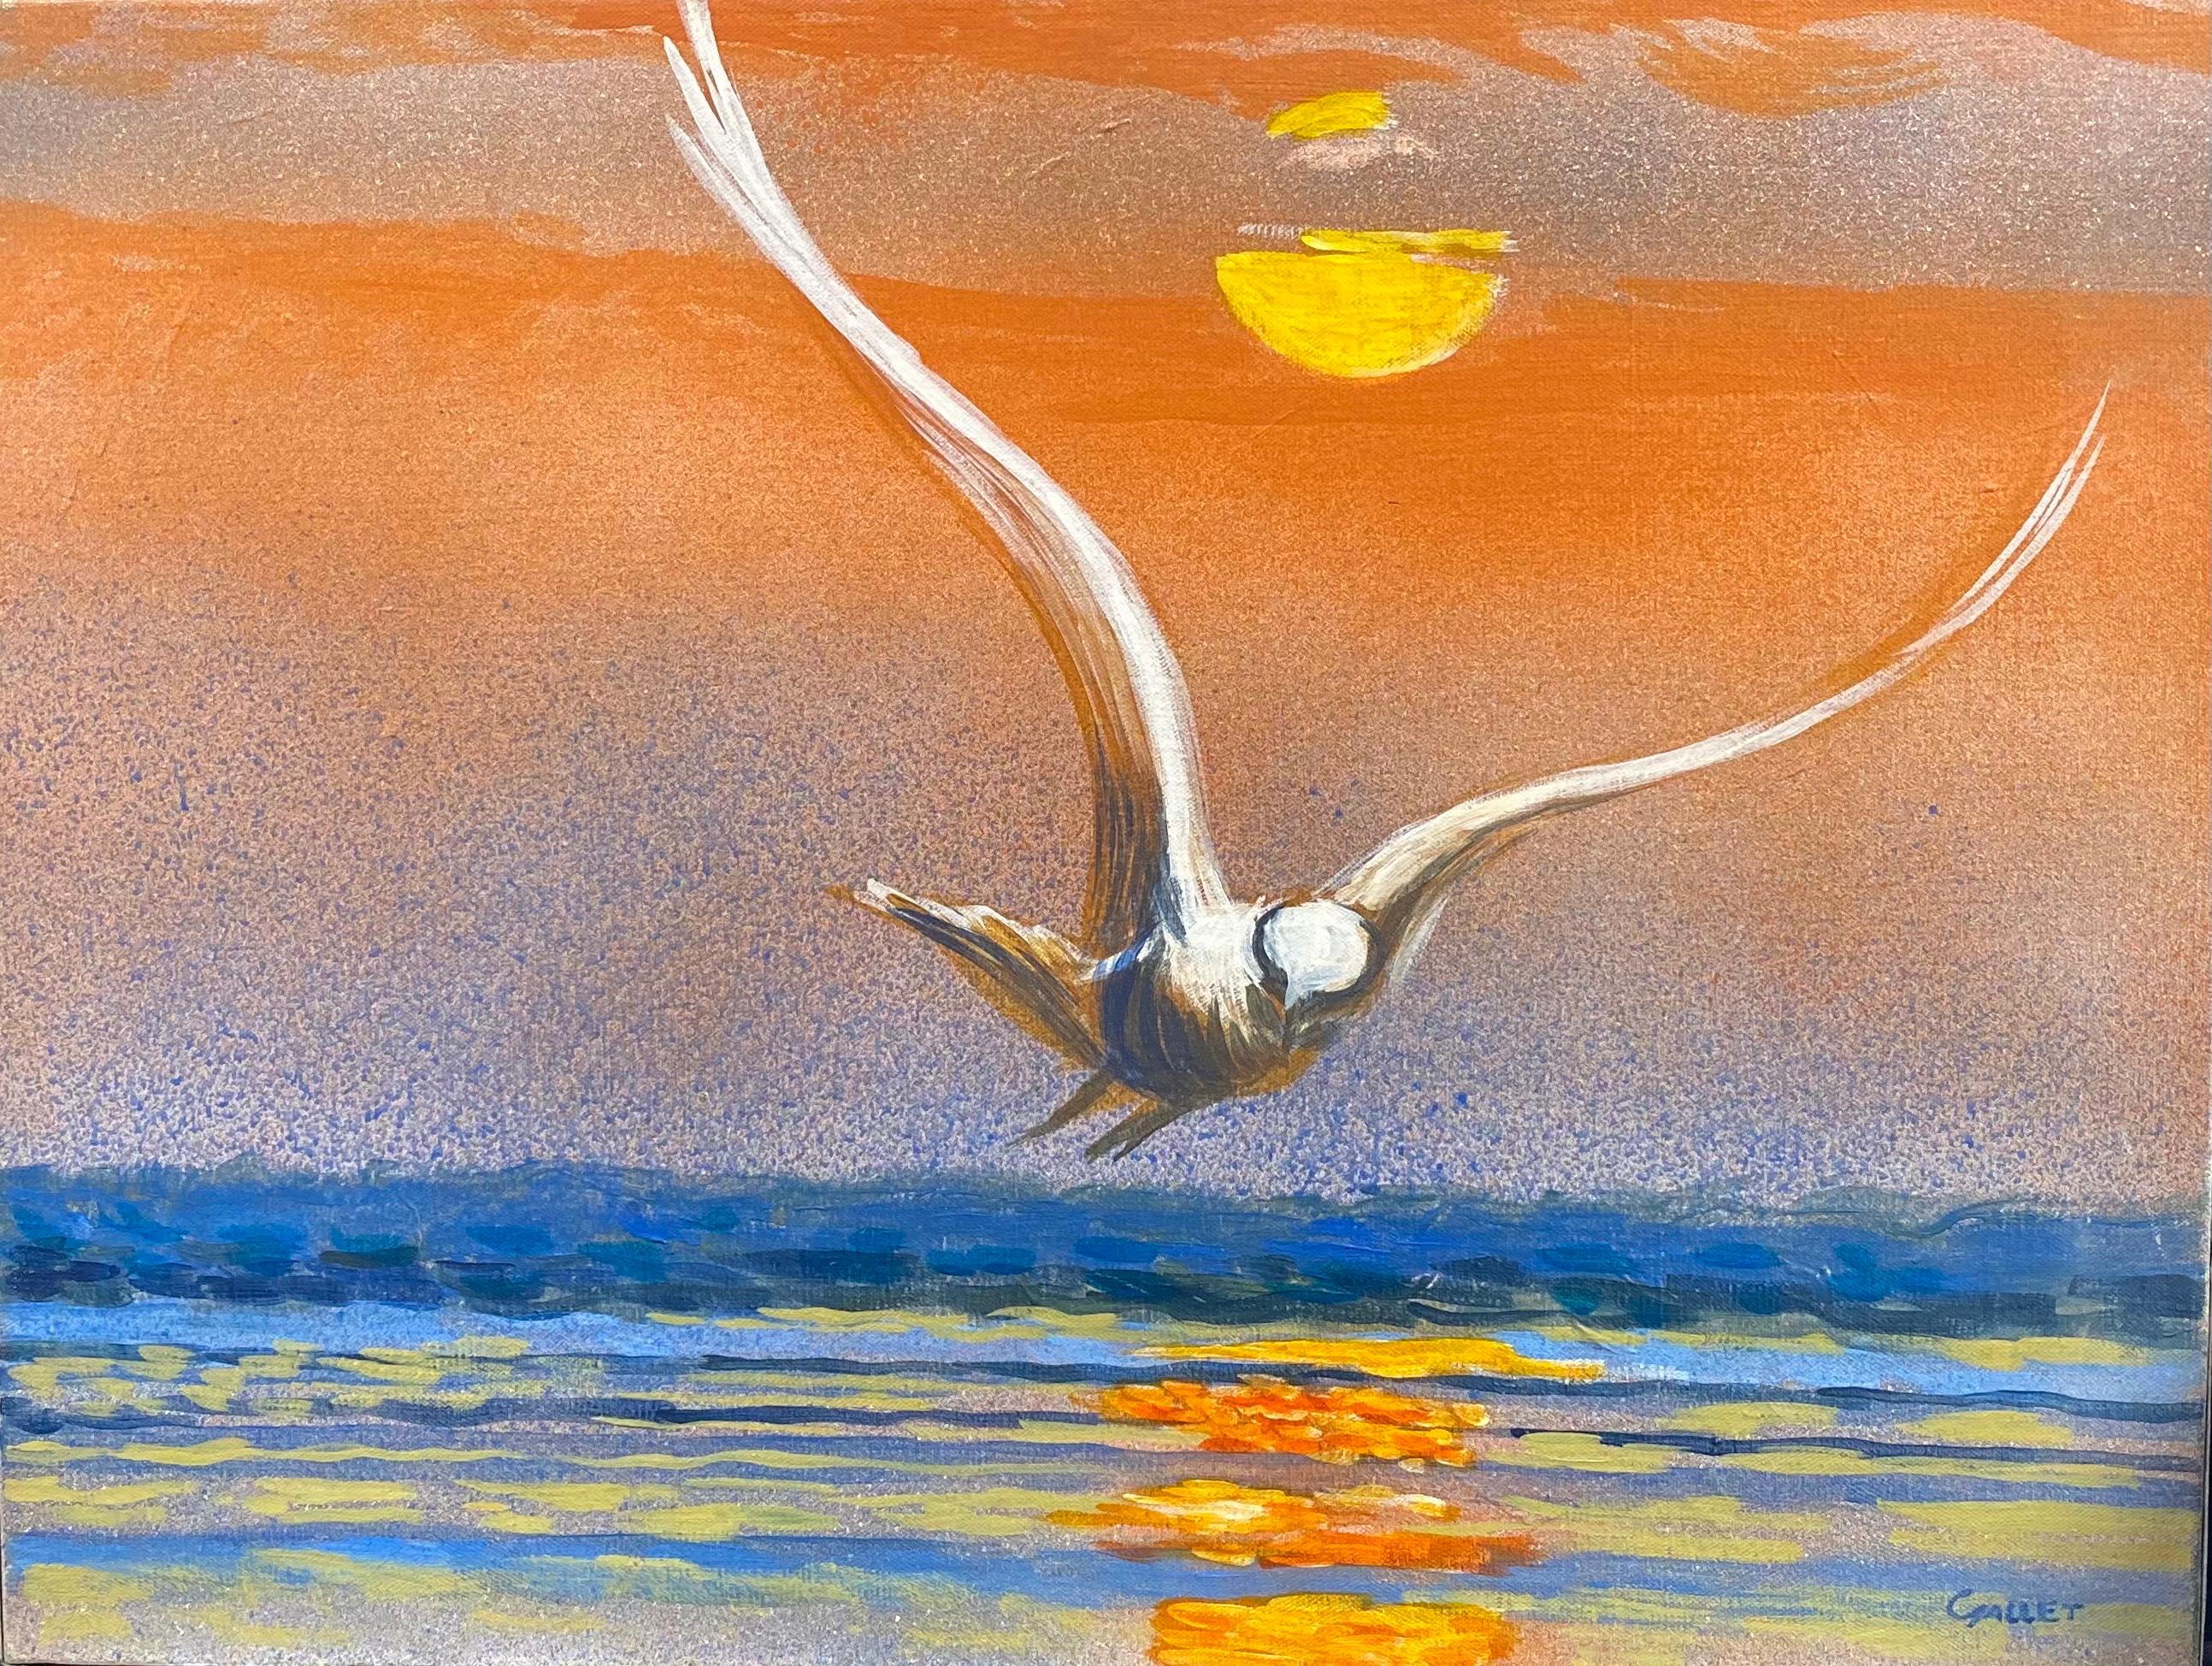 French Contemporary Animal Painting - Seagull in Flight Sunset Seascape, Signed Large Oil Painting